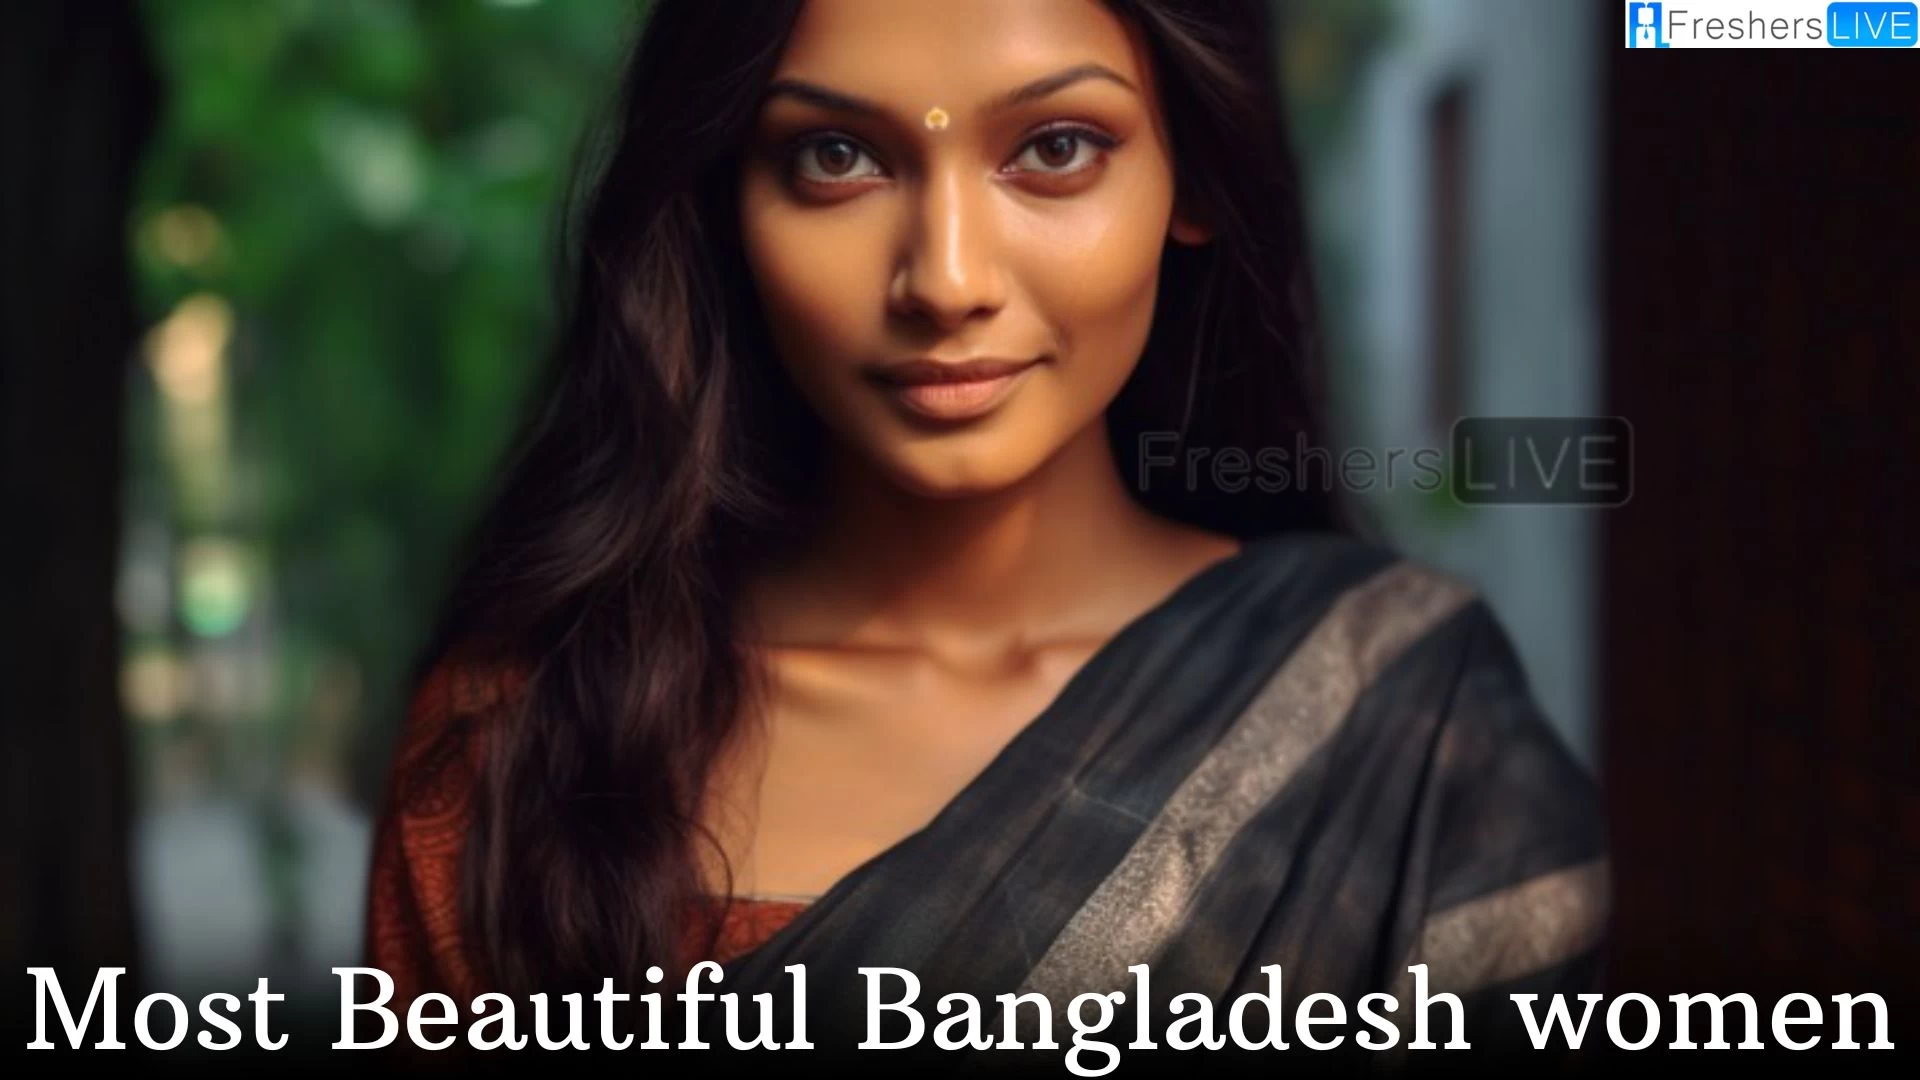 Most Beautiful Bangladesh Women - Top 10 Icons of Elegance and Talent